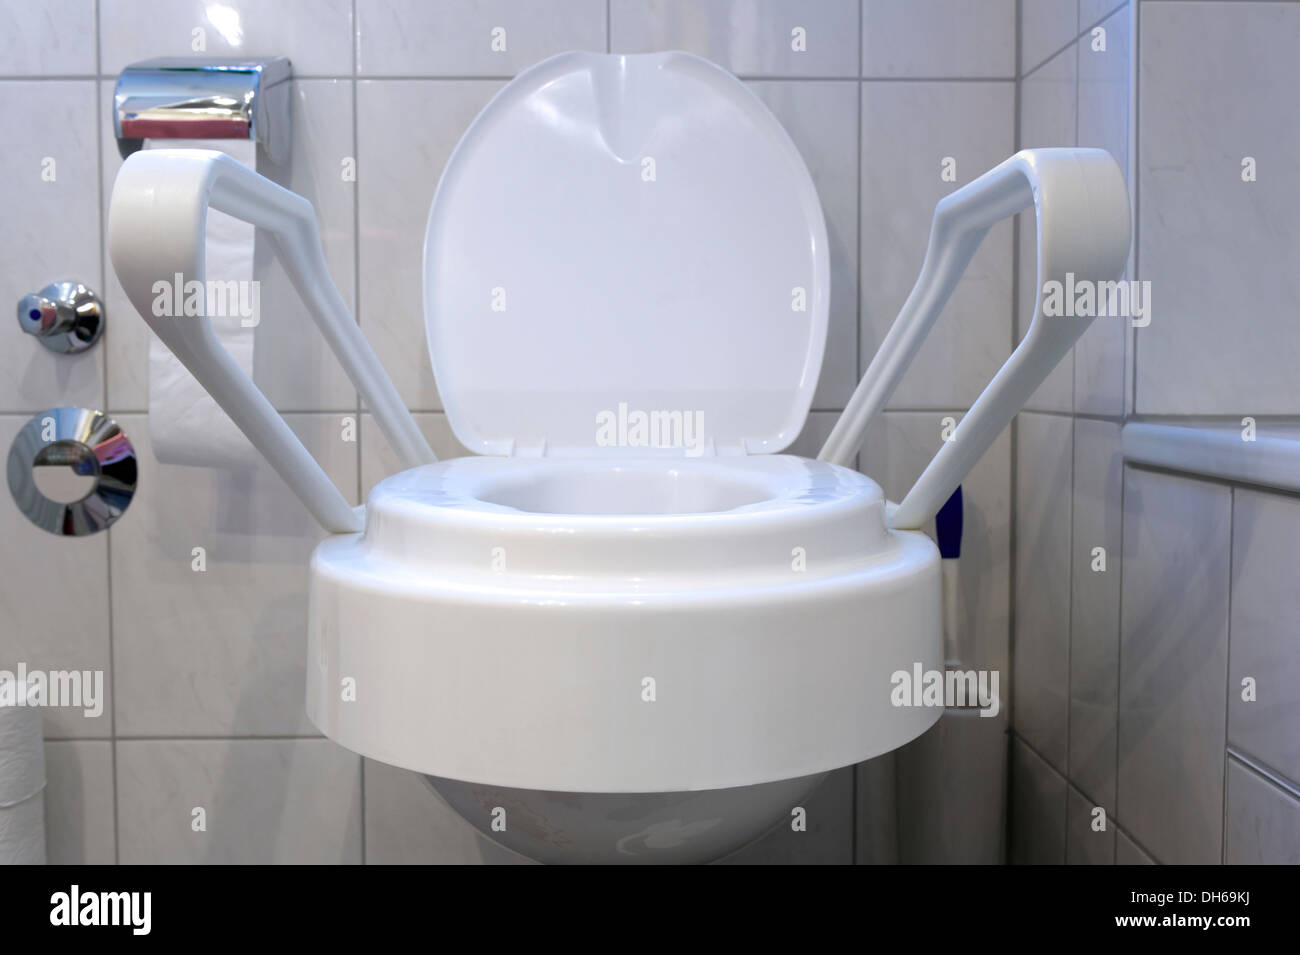 Booster seat for a toilet with two side arms, equipment for home care to care for dependent people in their homes Stock Photo